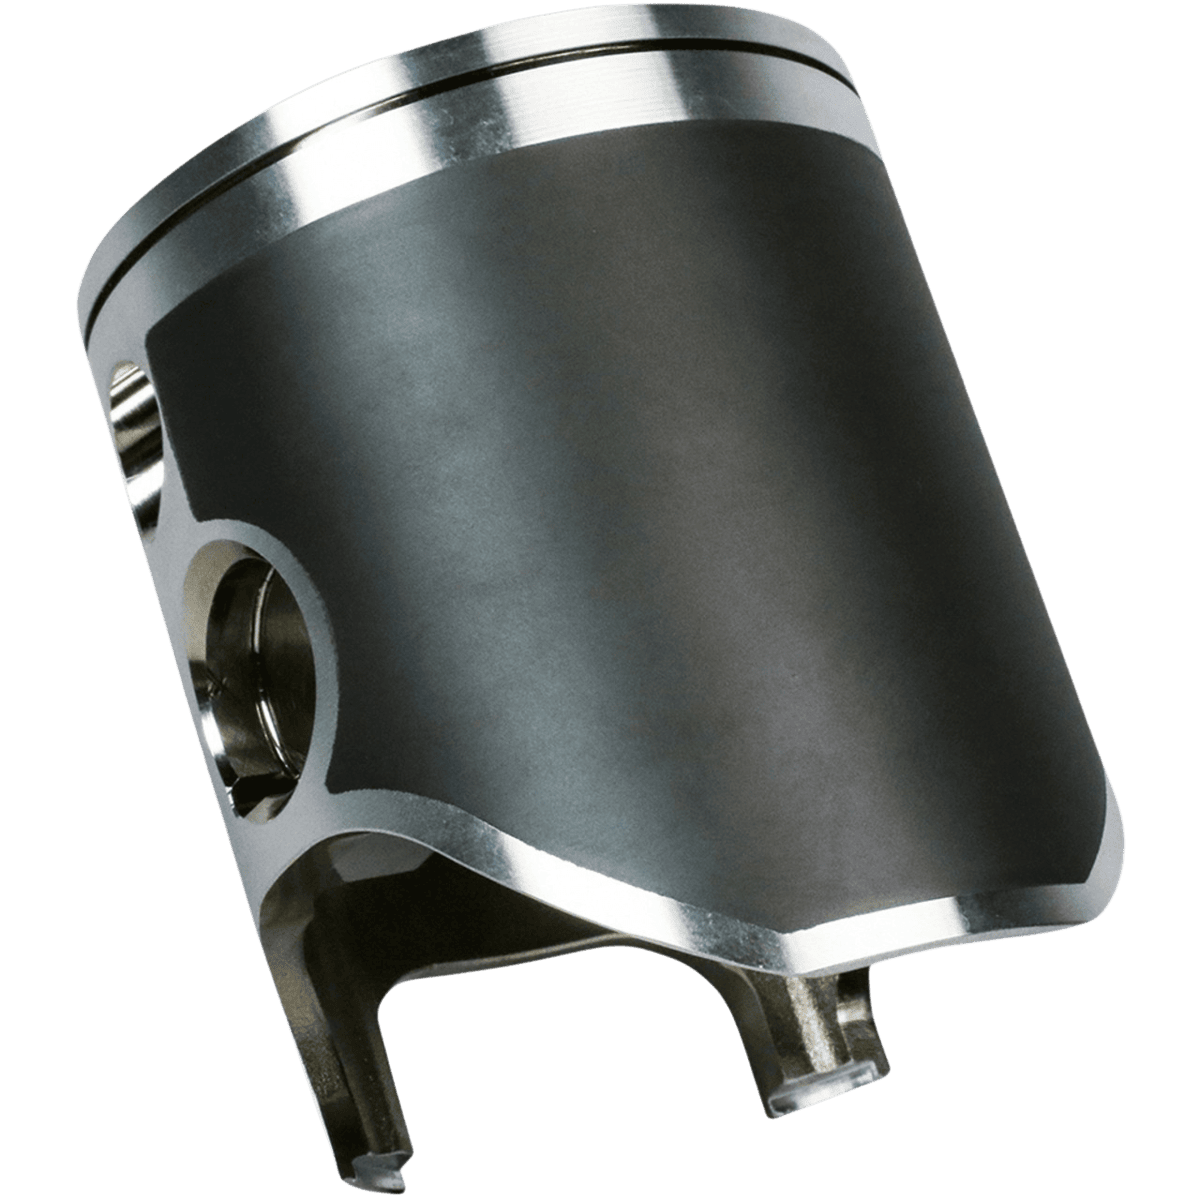 Best 1991 WR250 Piston Kit for Two strokes